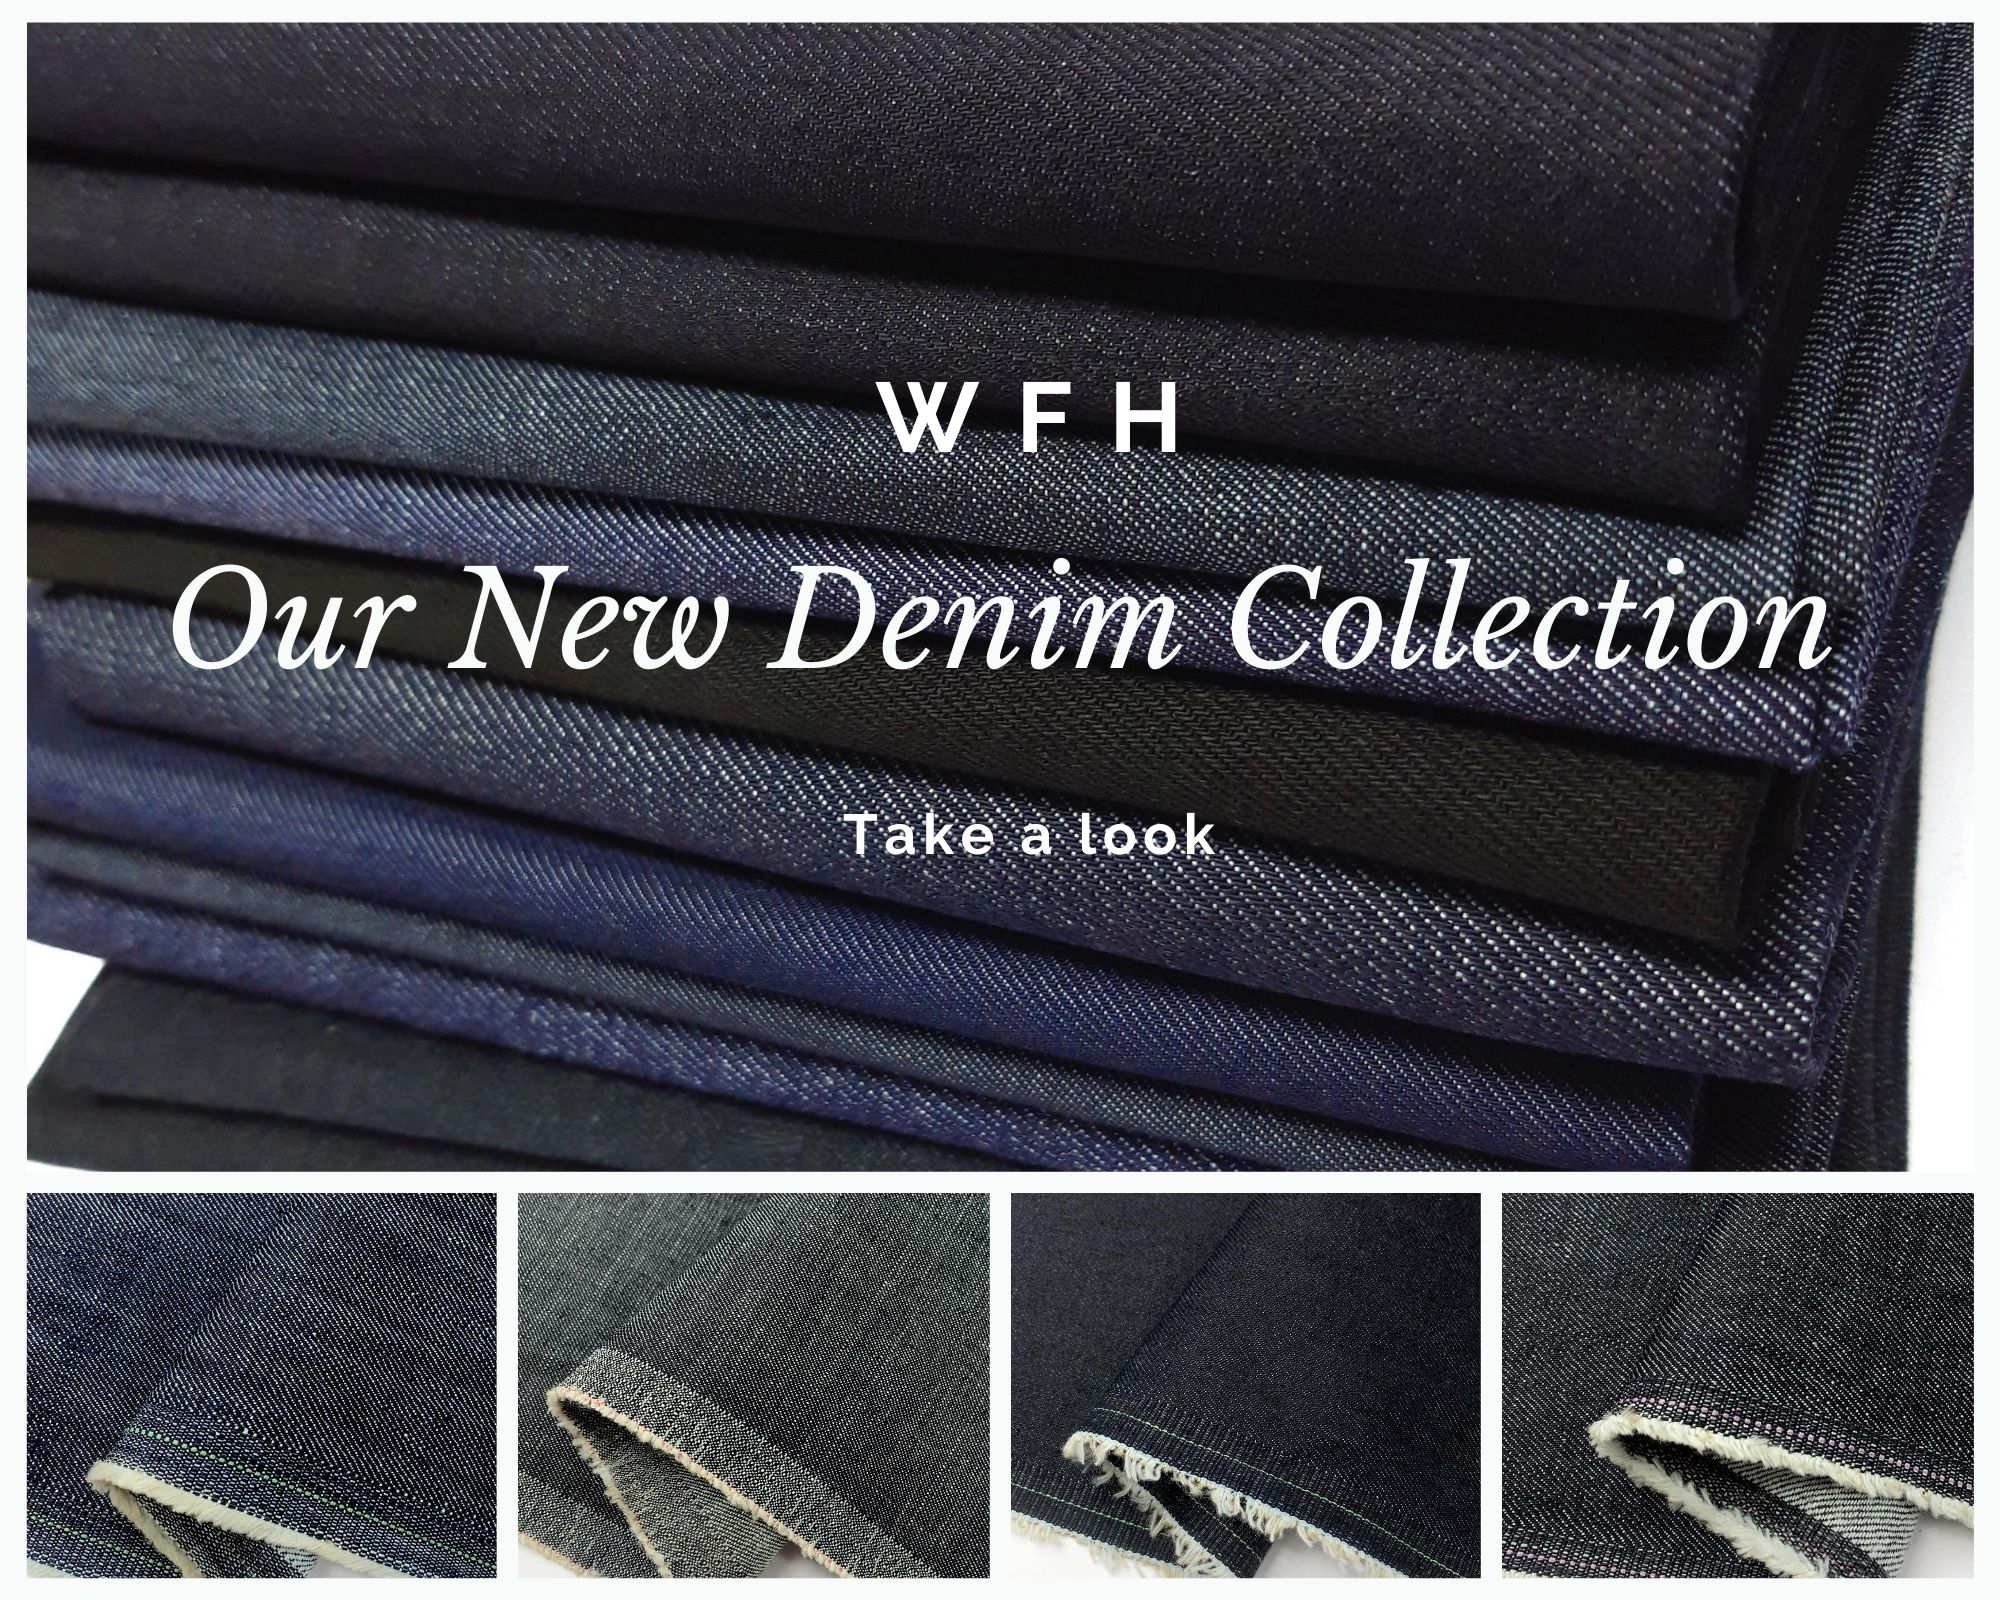 WFH - Our New Denim Collection - Croft Mill Fabric